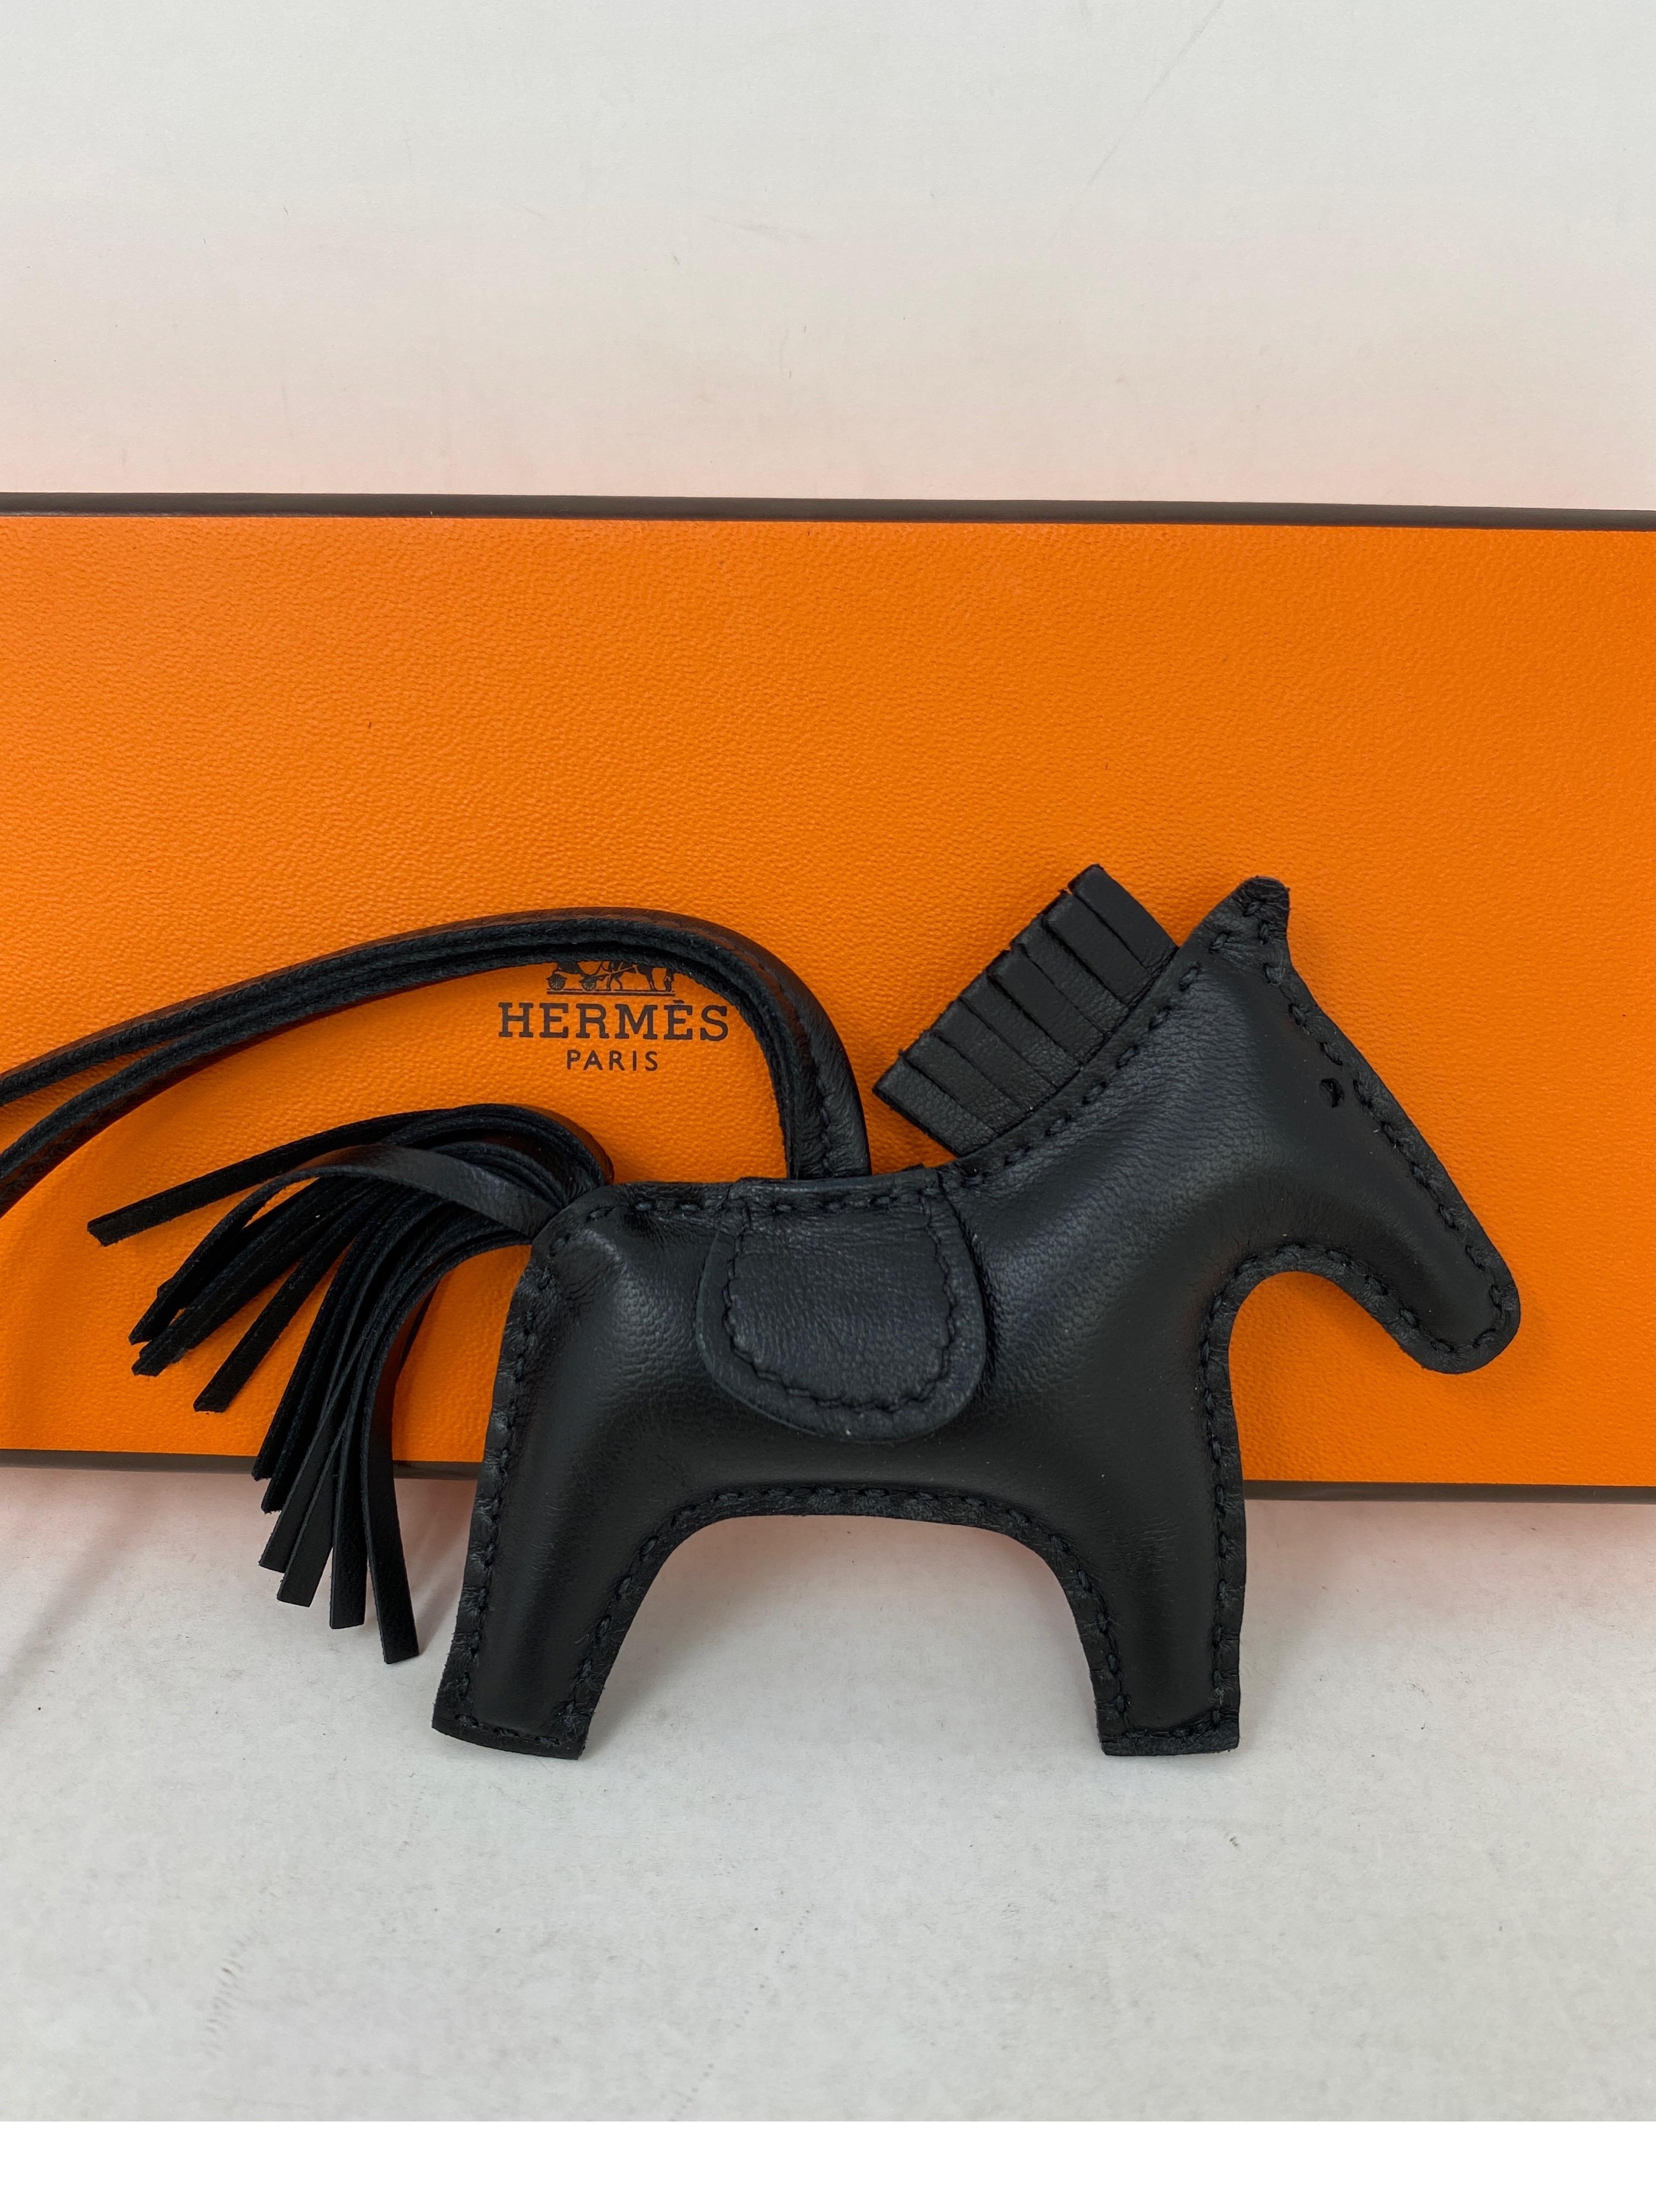 Hermes Mini size Rodeo Black Horse Charm. New condition. Rare and limited. Collector's piece. Will go perfect with a Birkin or Kelly bag. Guaranteed authentic. 